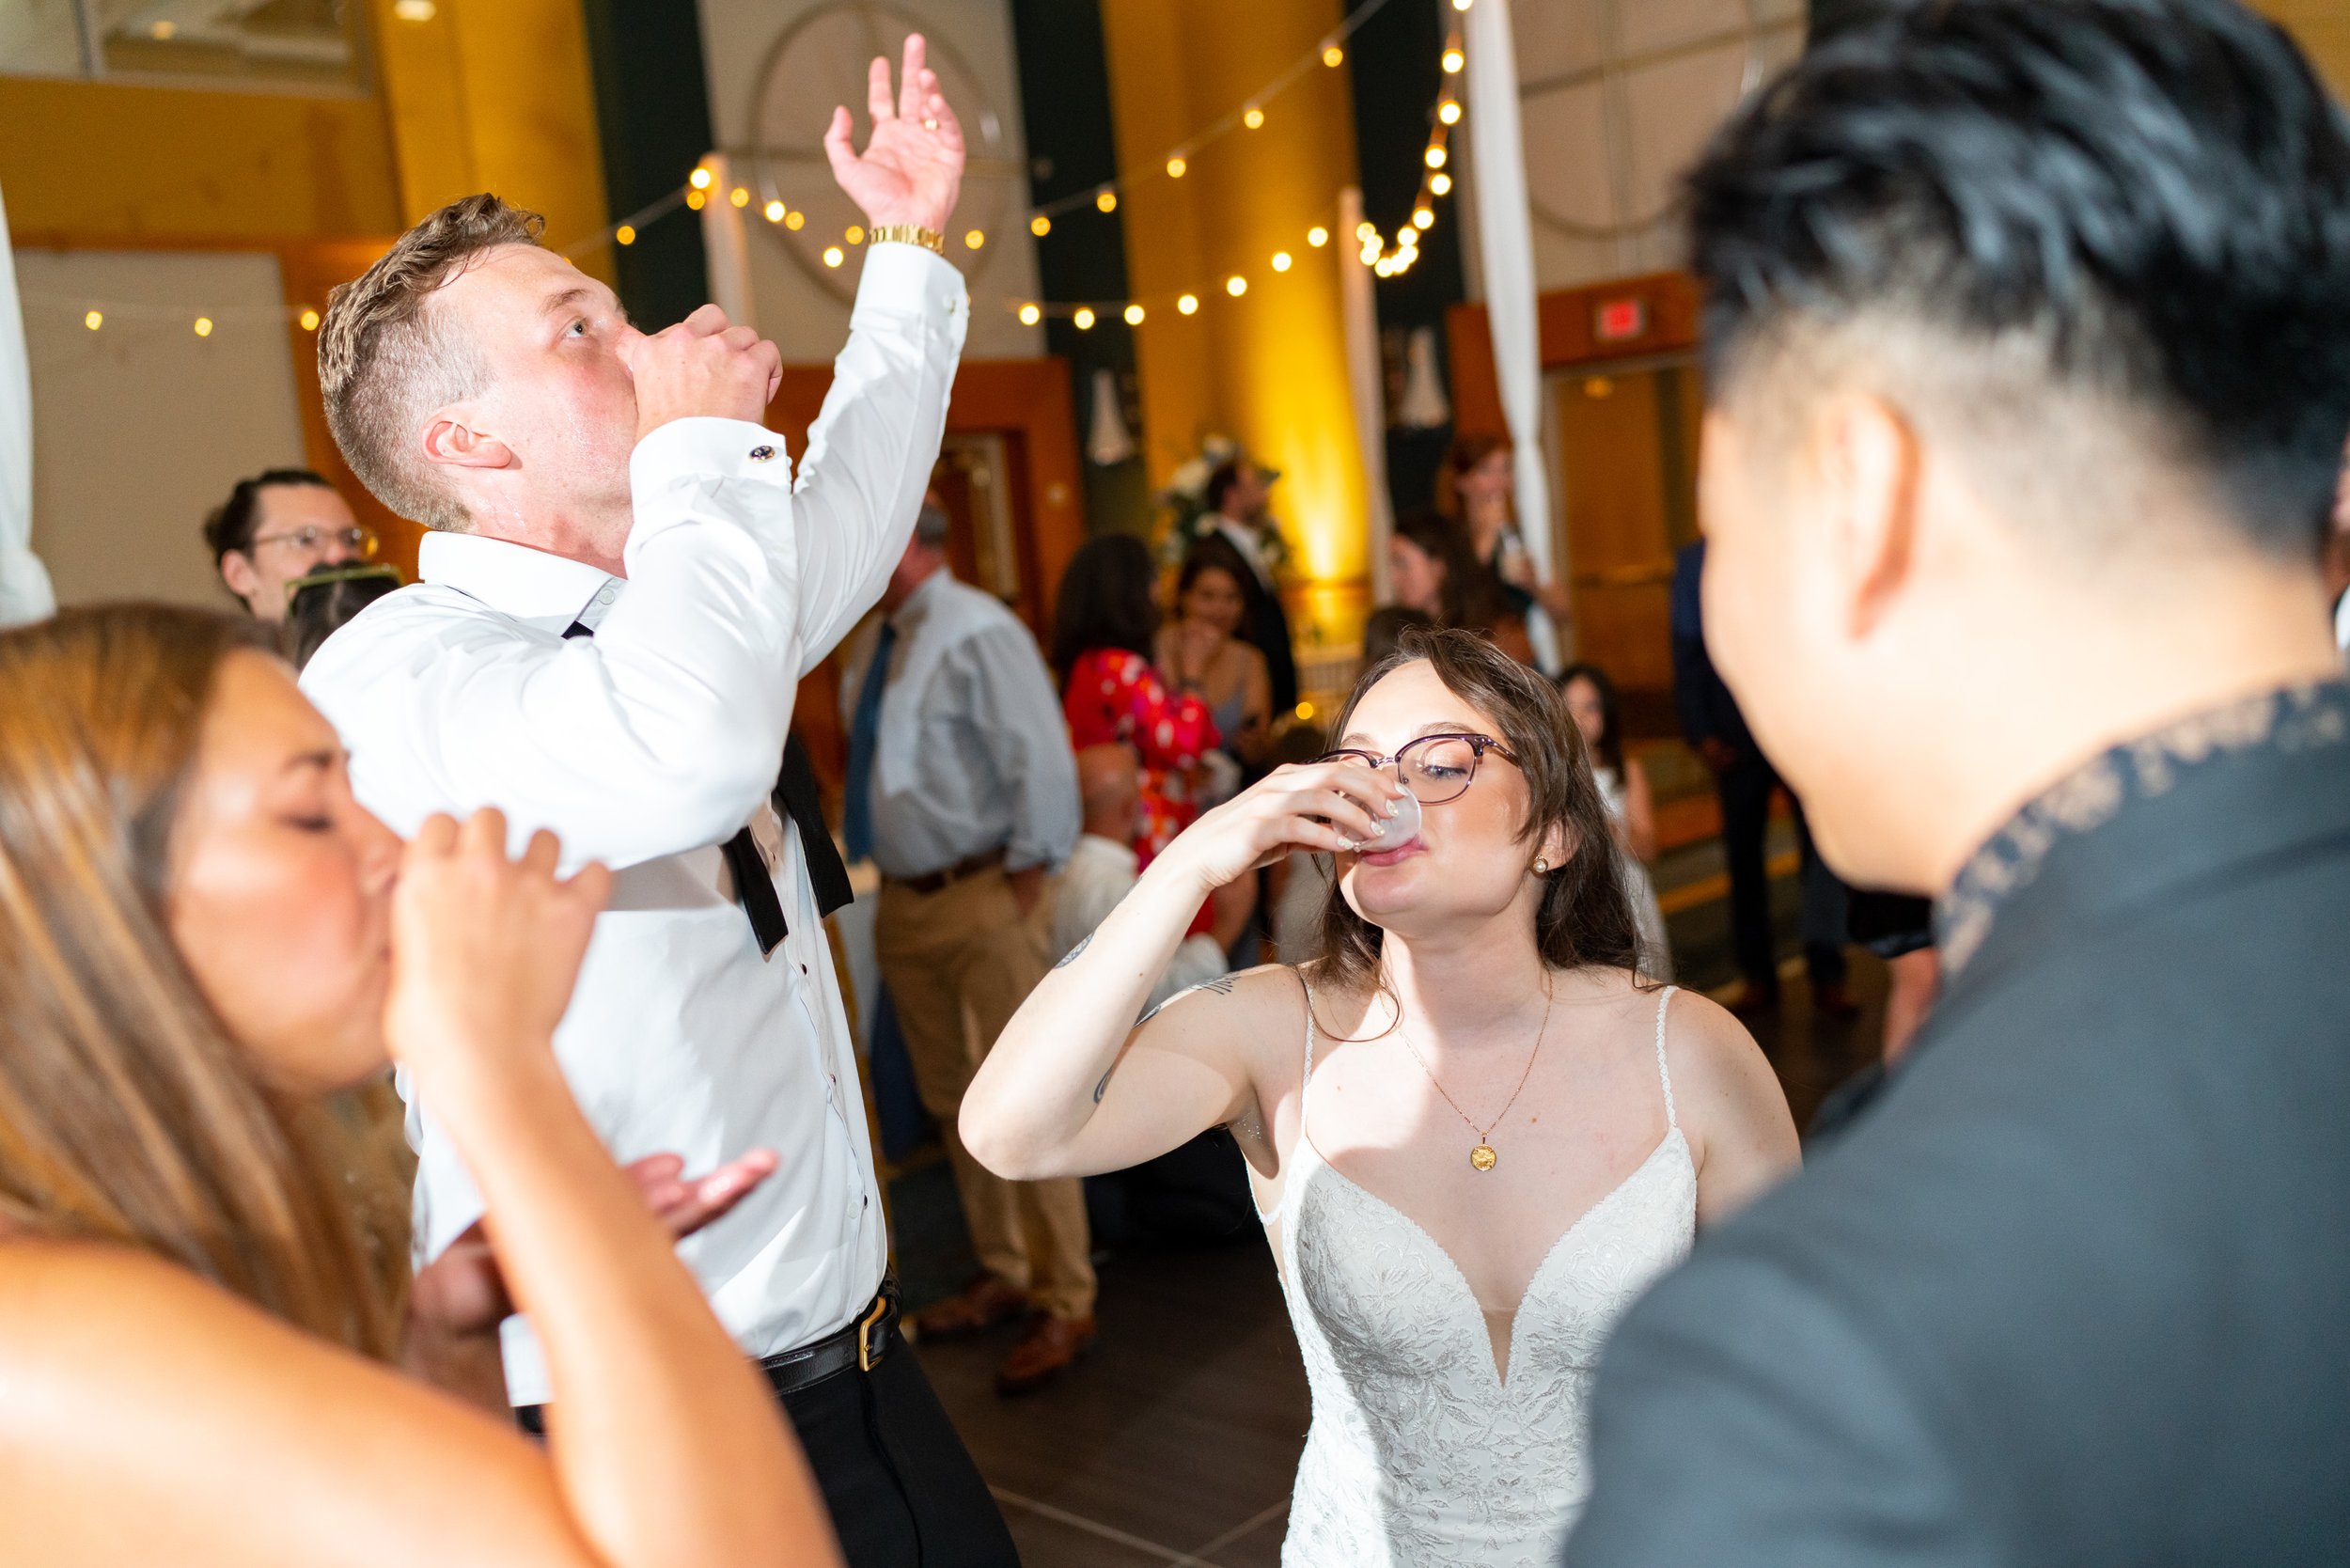 bride and groom do shots on the dance floor during wedding reception photos